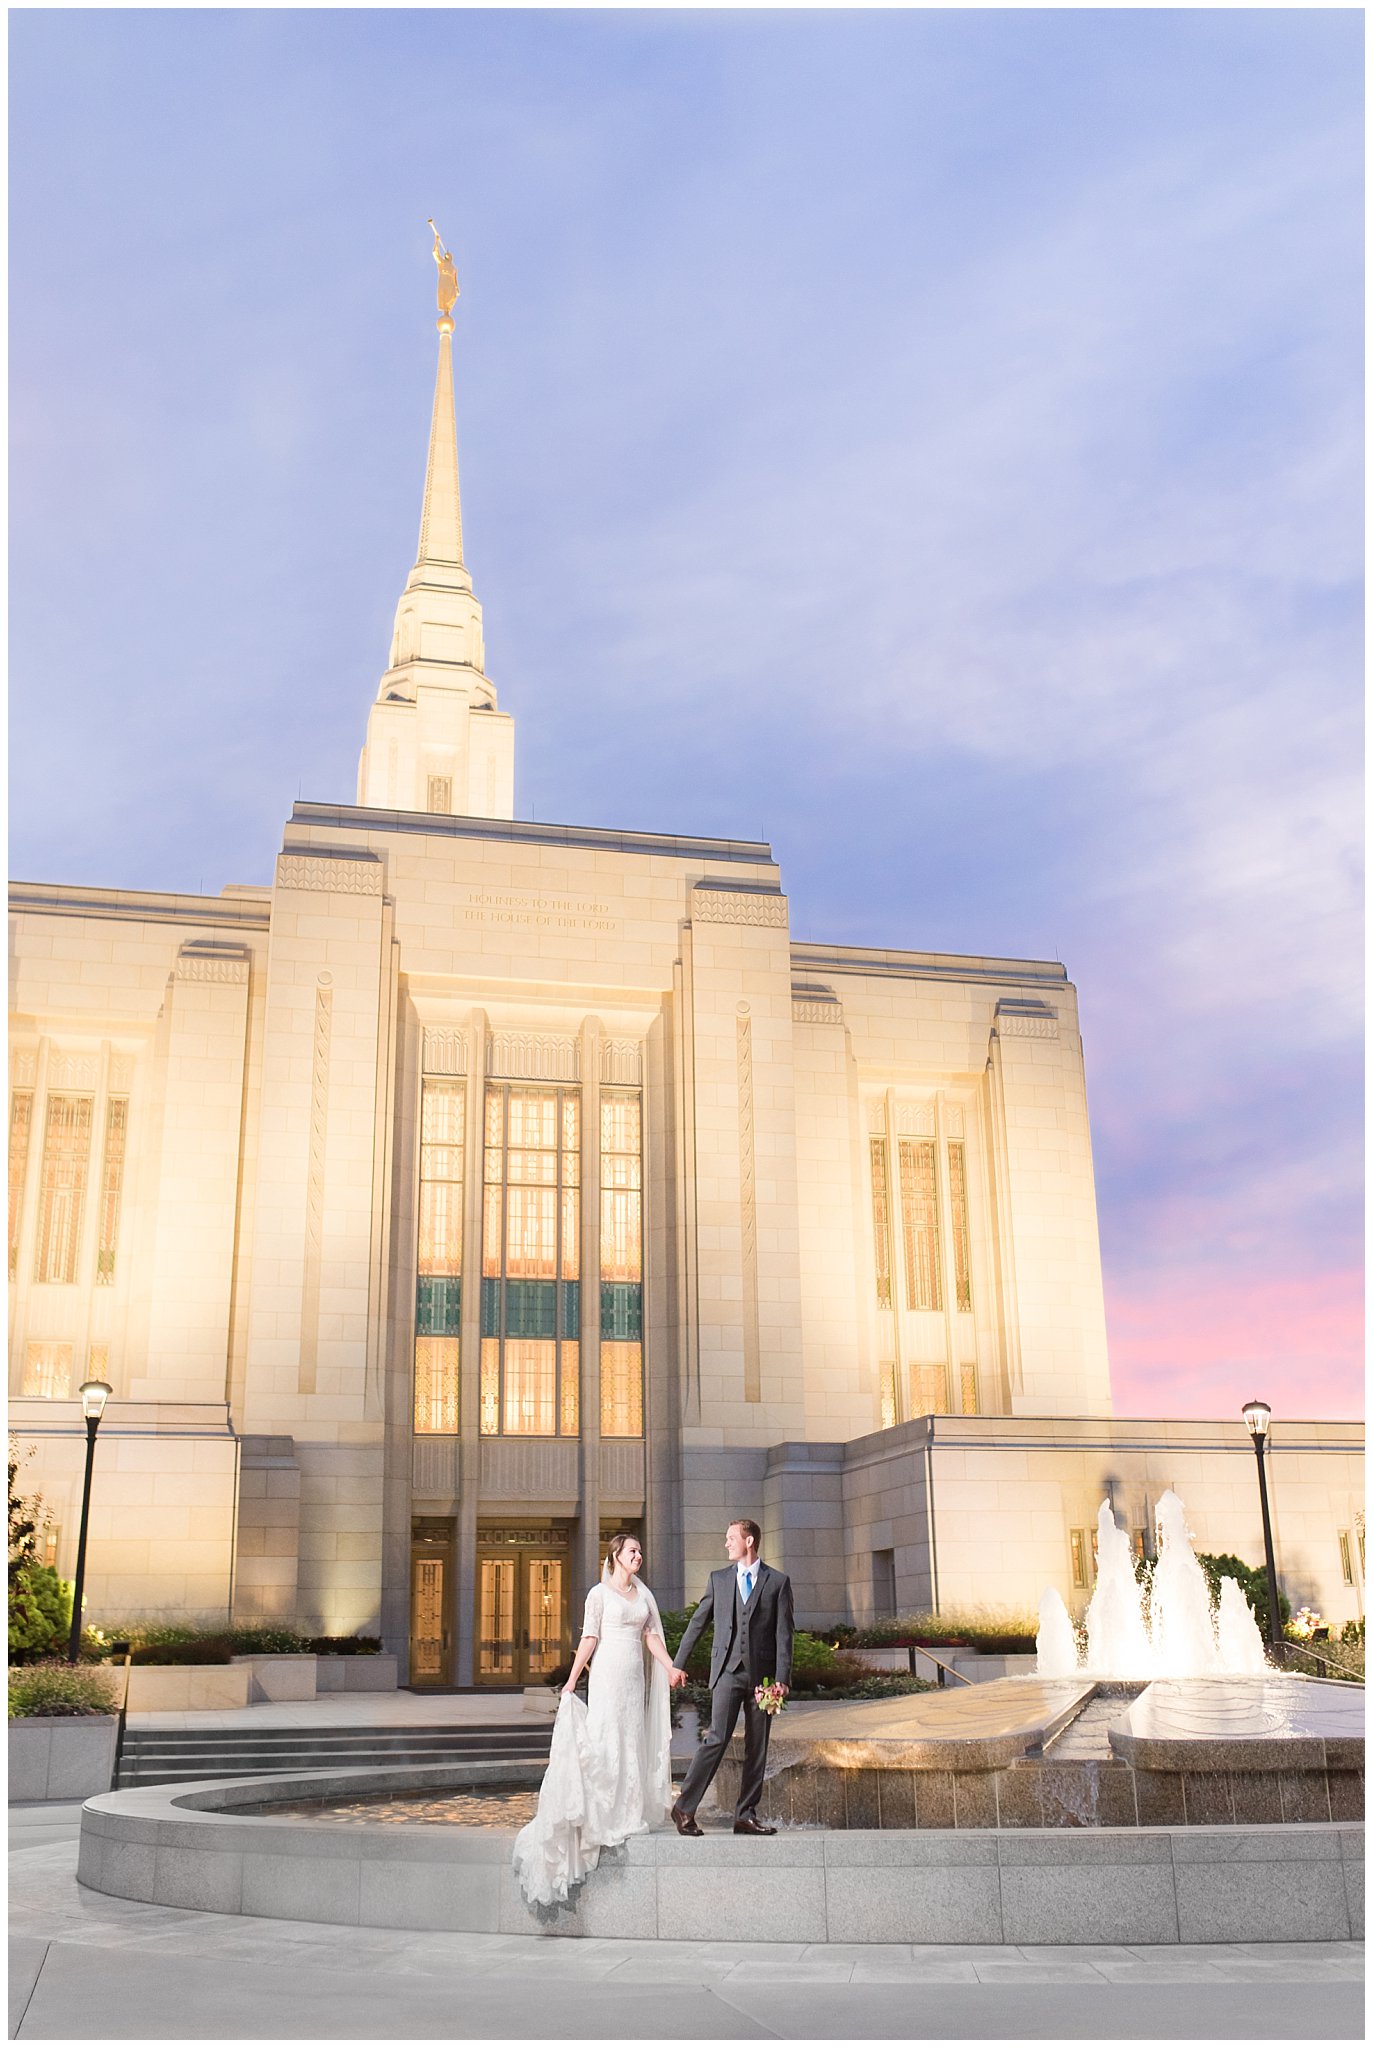 Bride and groom walk along fountain at the Ogden Temple during sunset | Top Utah Wedding and Couples Photos 2019 | Jessie and Dallin Photography